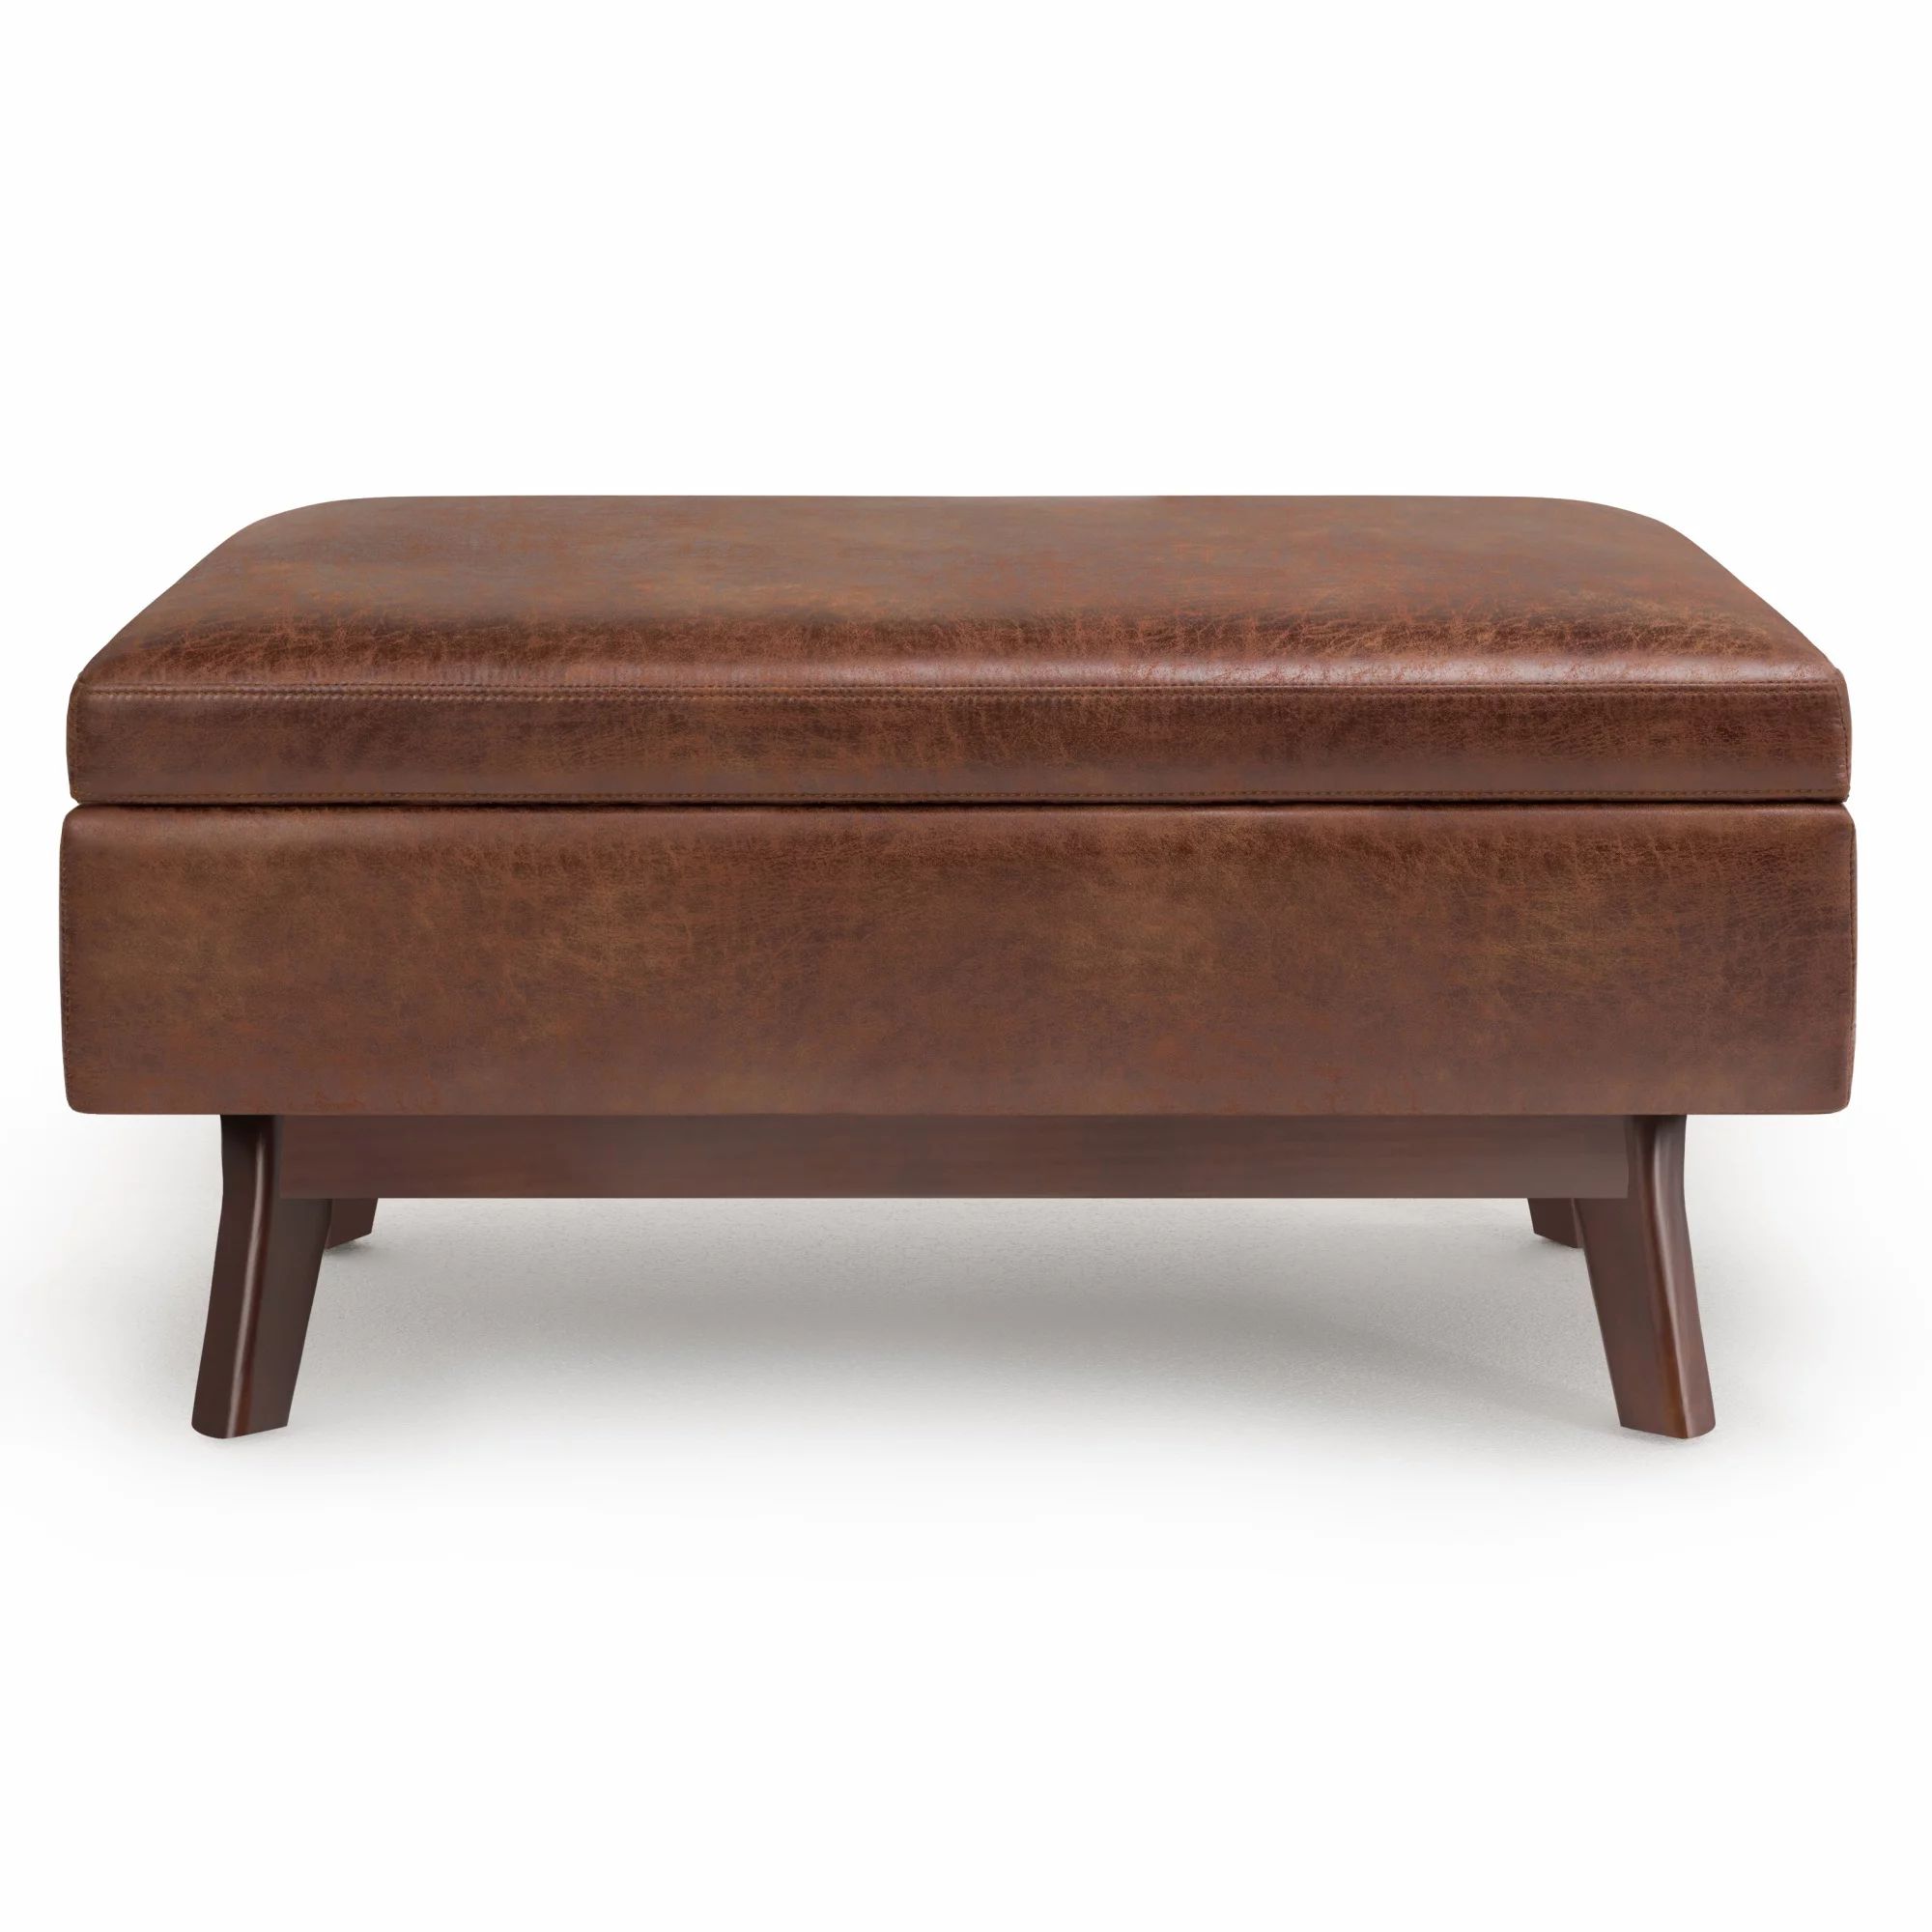 Owen Small Rectangular Storage Ottoman in Distressed Saddle Brown Faux Air Leather | Walmart (US)